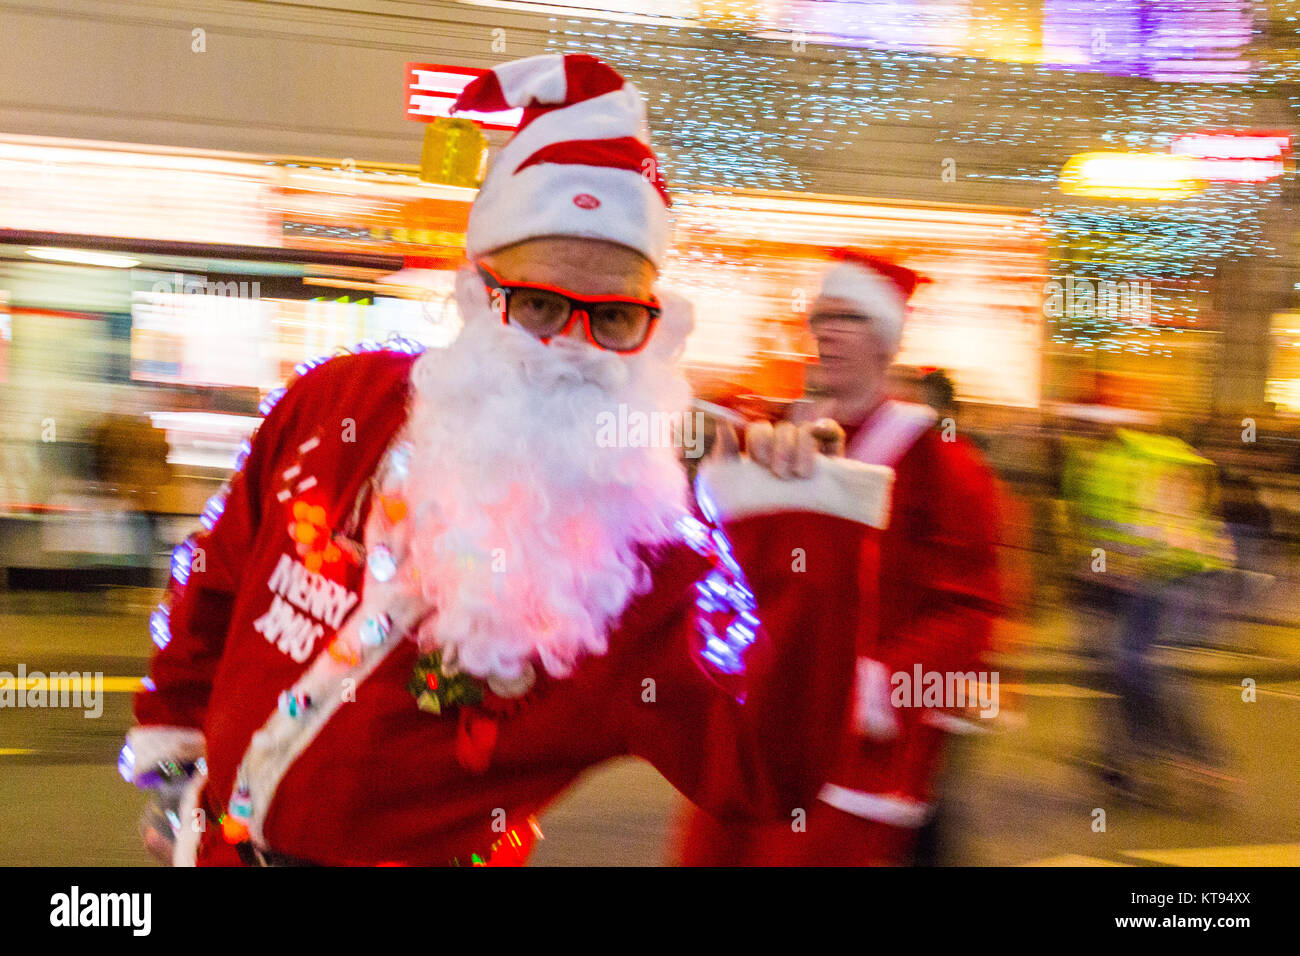 London, UK. 23rd Dec, 2017. A horde of rollerblading Santas skate down Oxford Street as shoppers crowd London on the second last shopping days before Christmas. Credit: Paul Davey/Alamy Live News Stock Photo